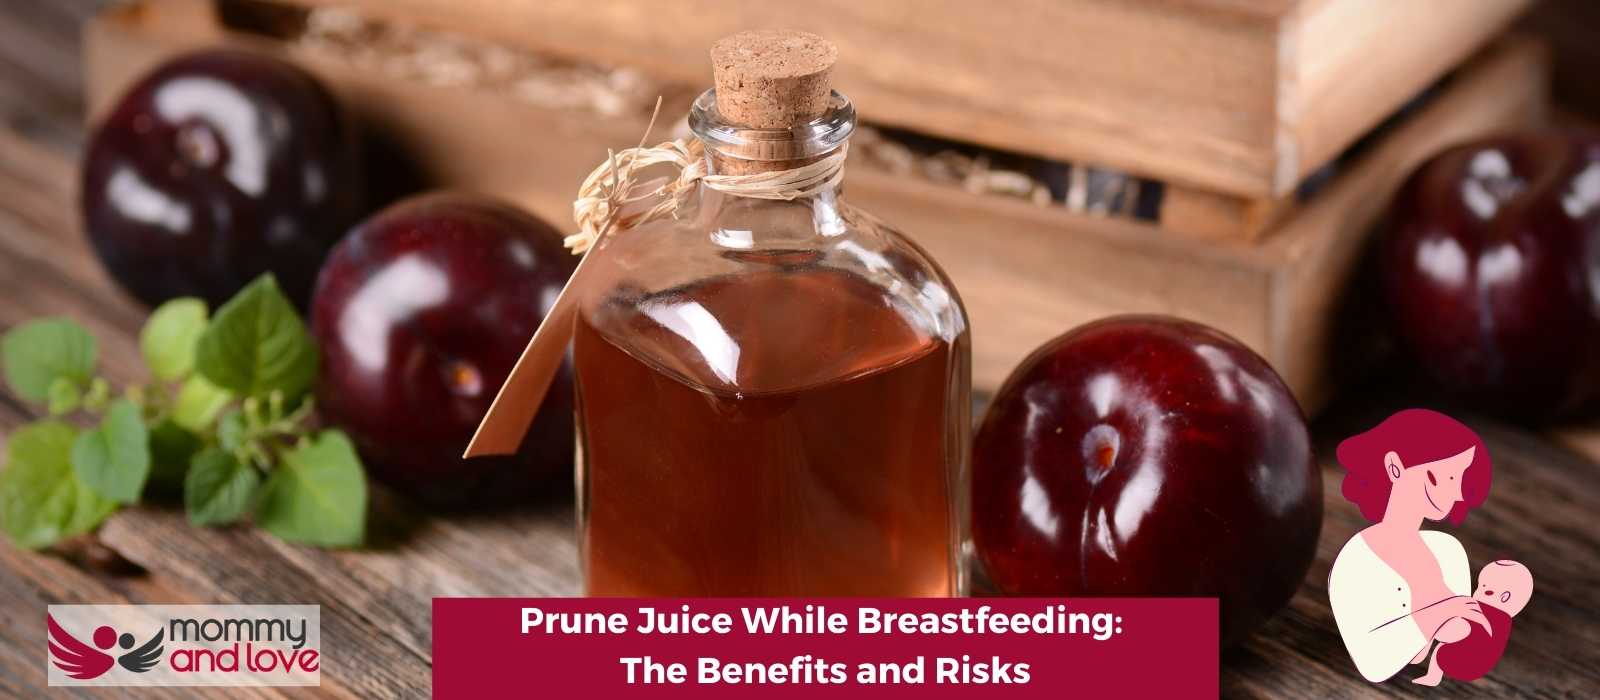 Prune Juice While Breastfeeding The Benefits and Risks